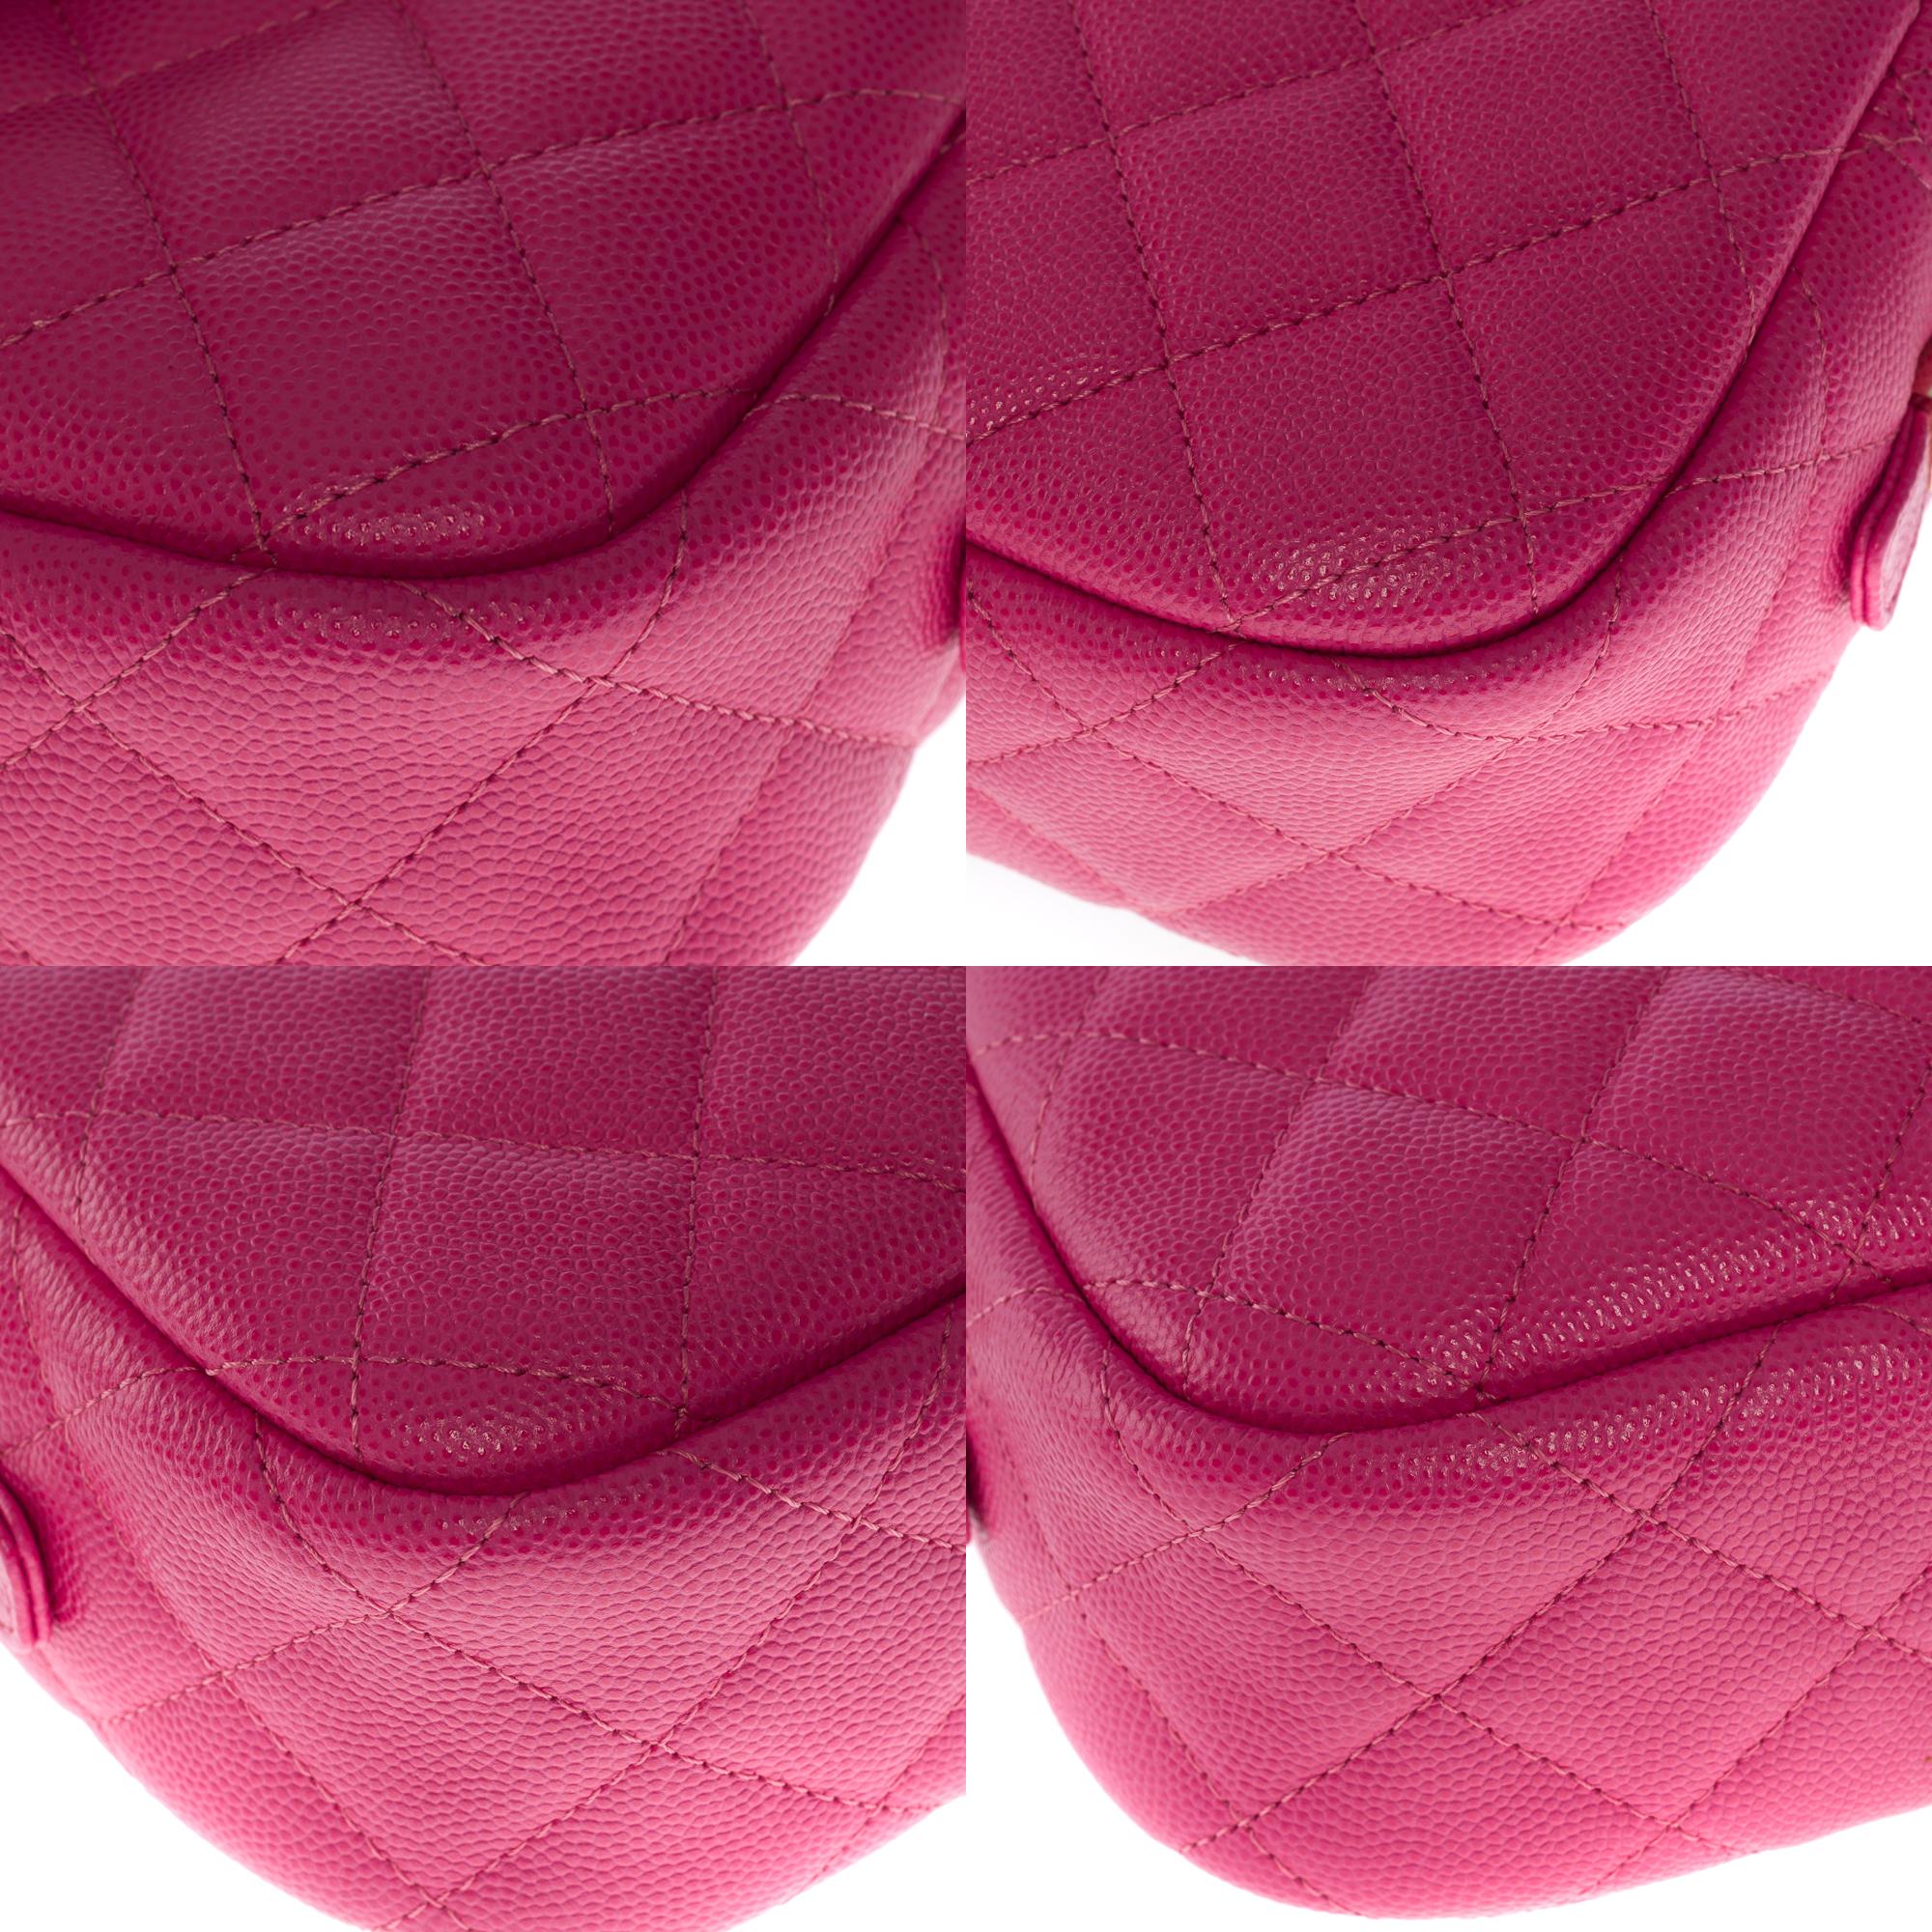 New- Amazing Chanel Mini Camera shoulder bag in Pink caviar leather, CHW 6